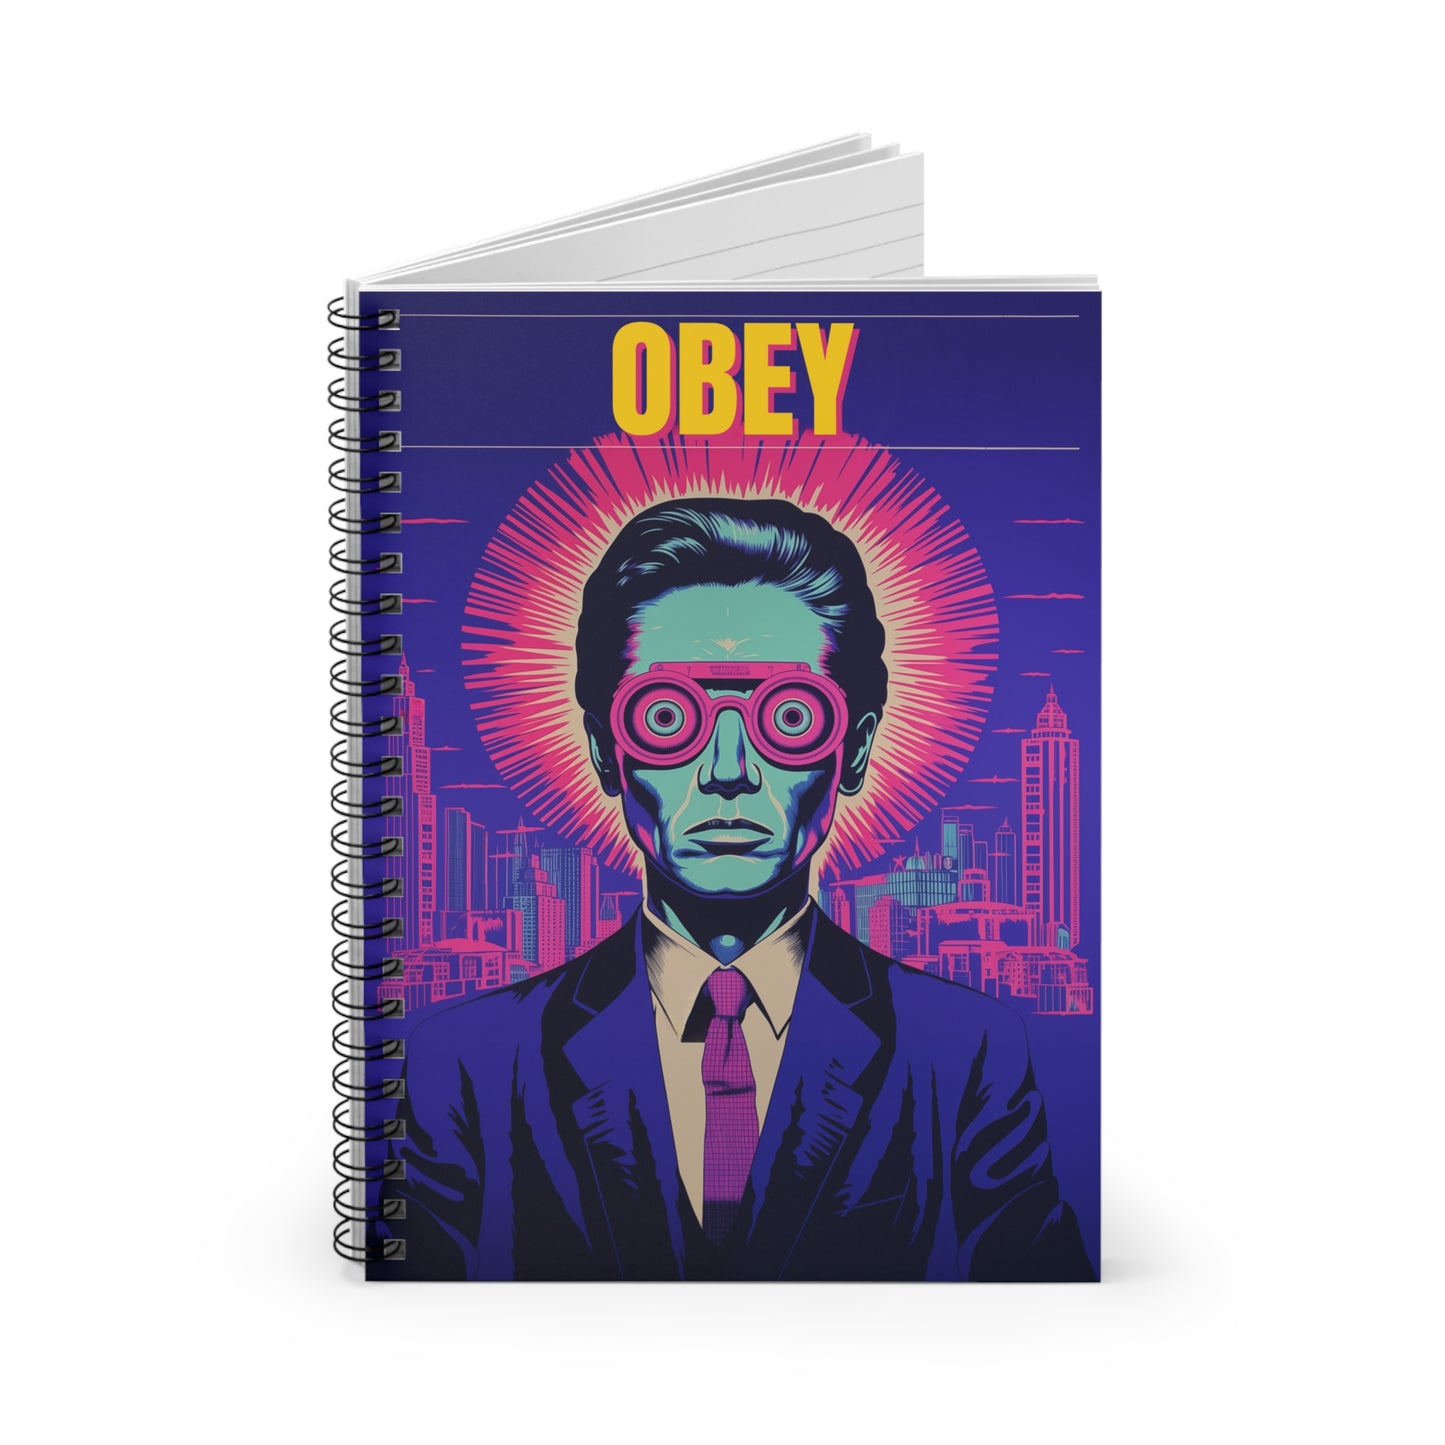 OBEY Spiral Notebook - Ruled Line